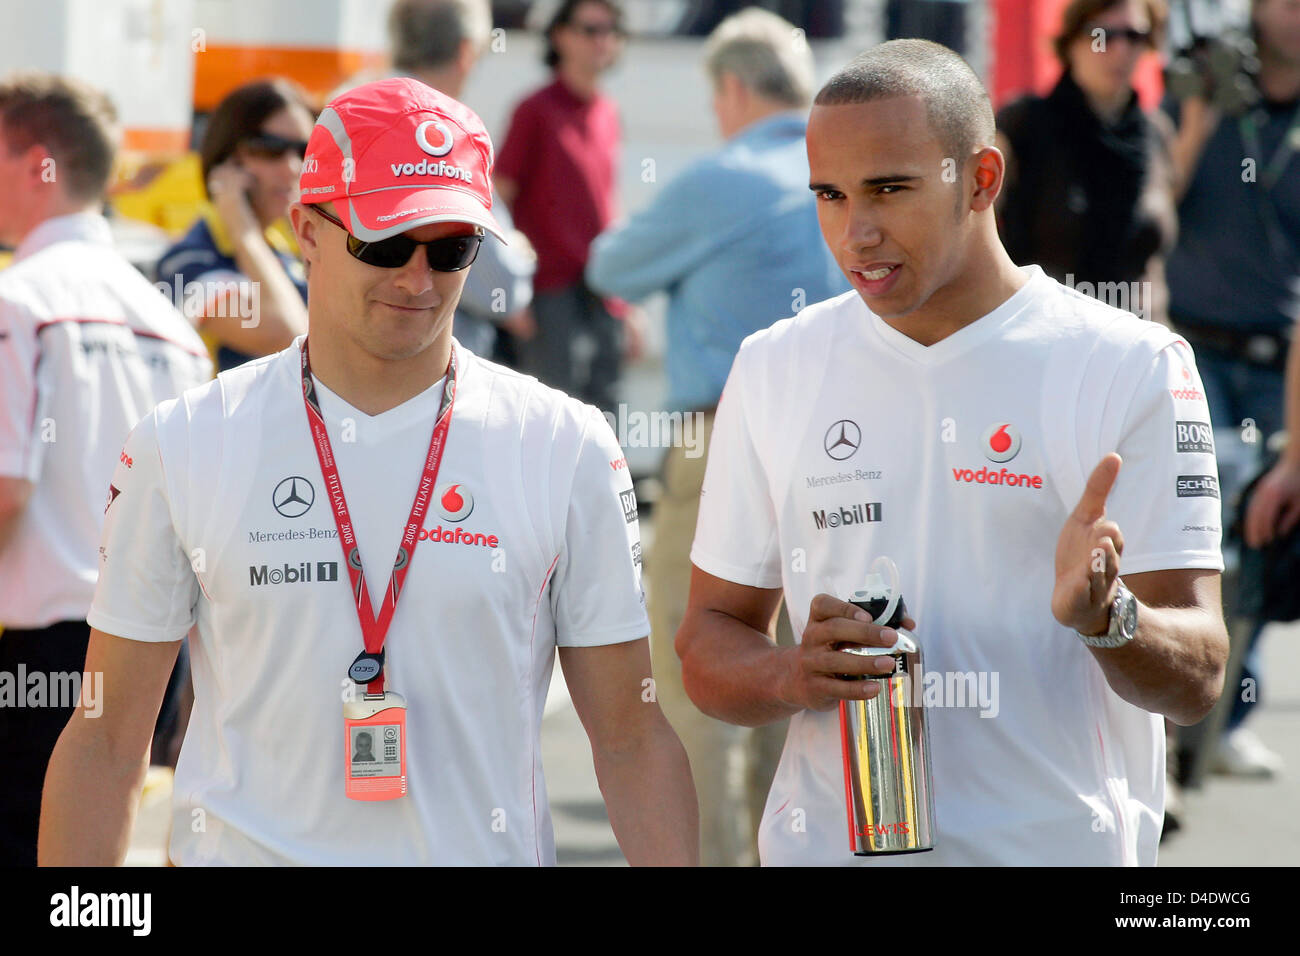 Finnish Formula One driver Heikki Kovalainen of McLaren Mercedes (L) and his British team-mate Lewis Hamilton (R) walk through the paddock of Circuit de Catalunya in Montmelo near Barcelona, Spain, 25 April 2008. The Formula 1 Grand Prix of Spain be held here on 27 April. Photo: Felix Heyder Stock Photo